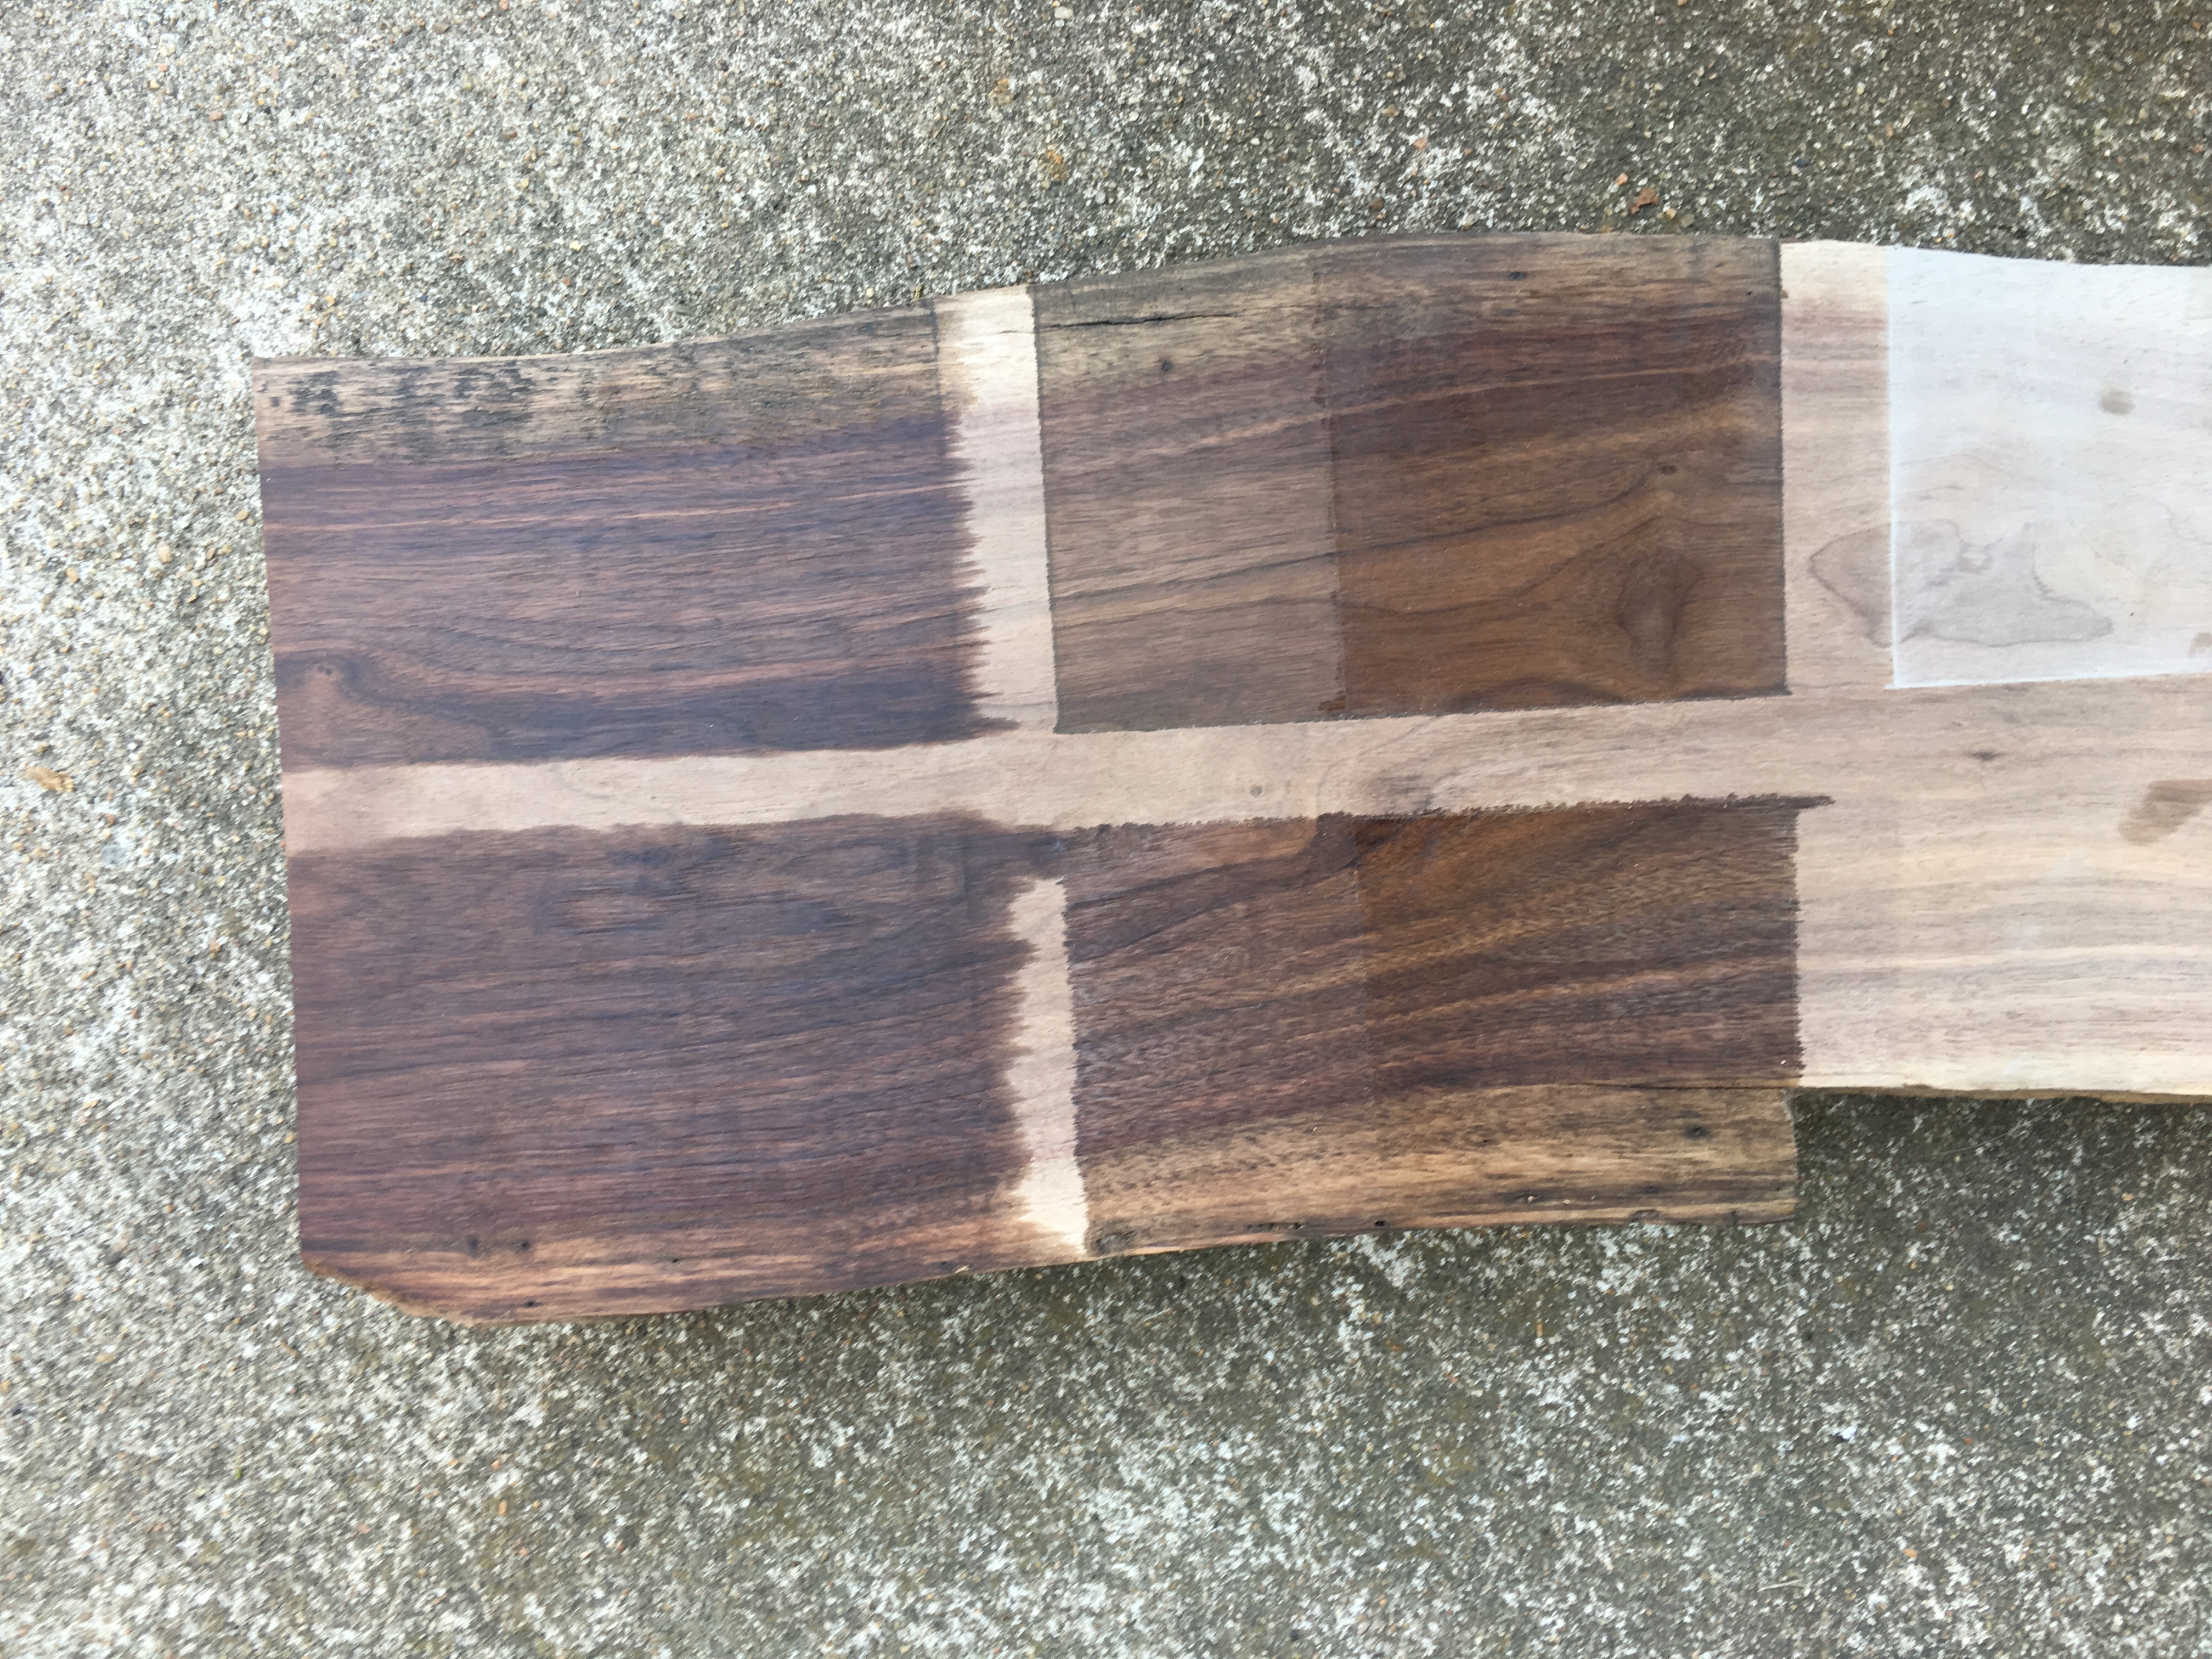 Comparing Boiled Linseed Oil and 100% Tung Oil as a Finish